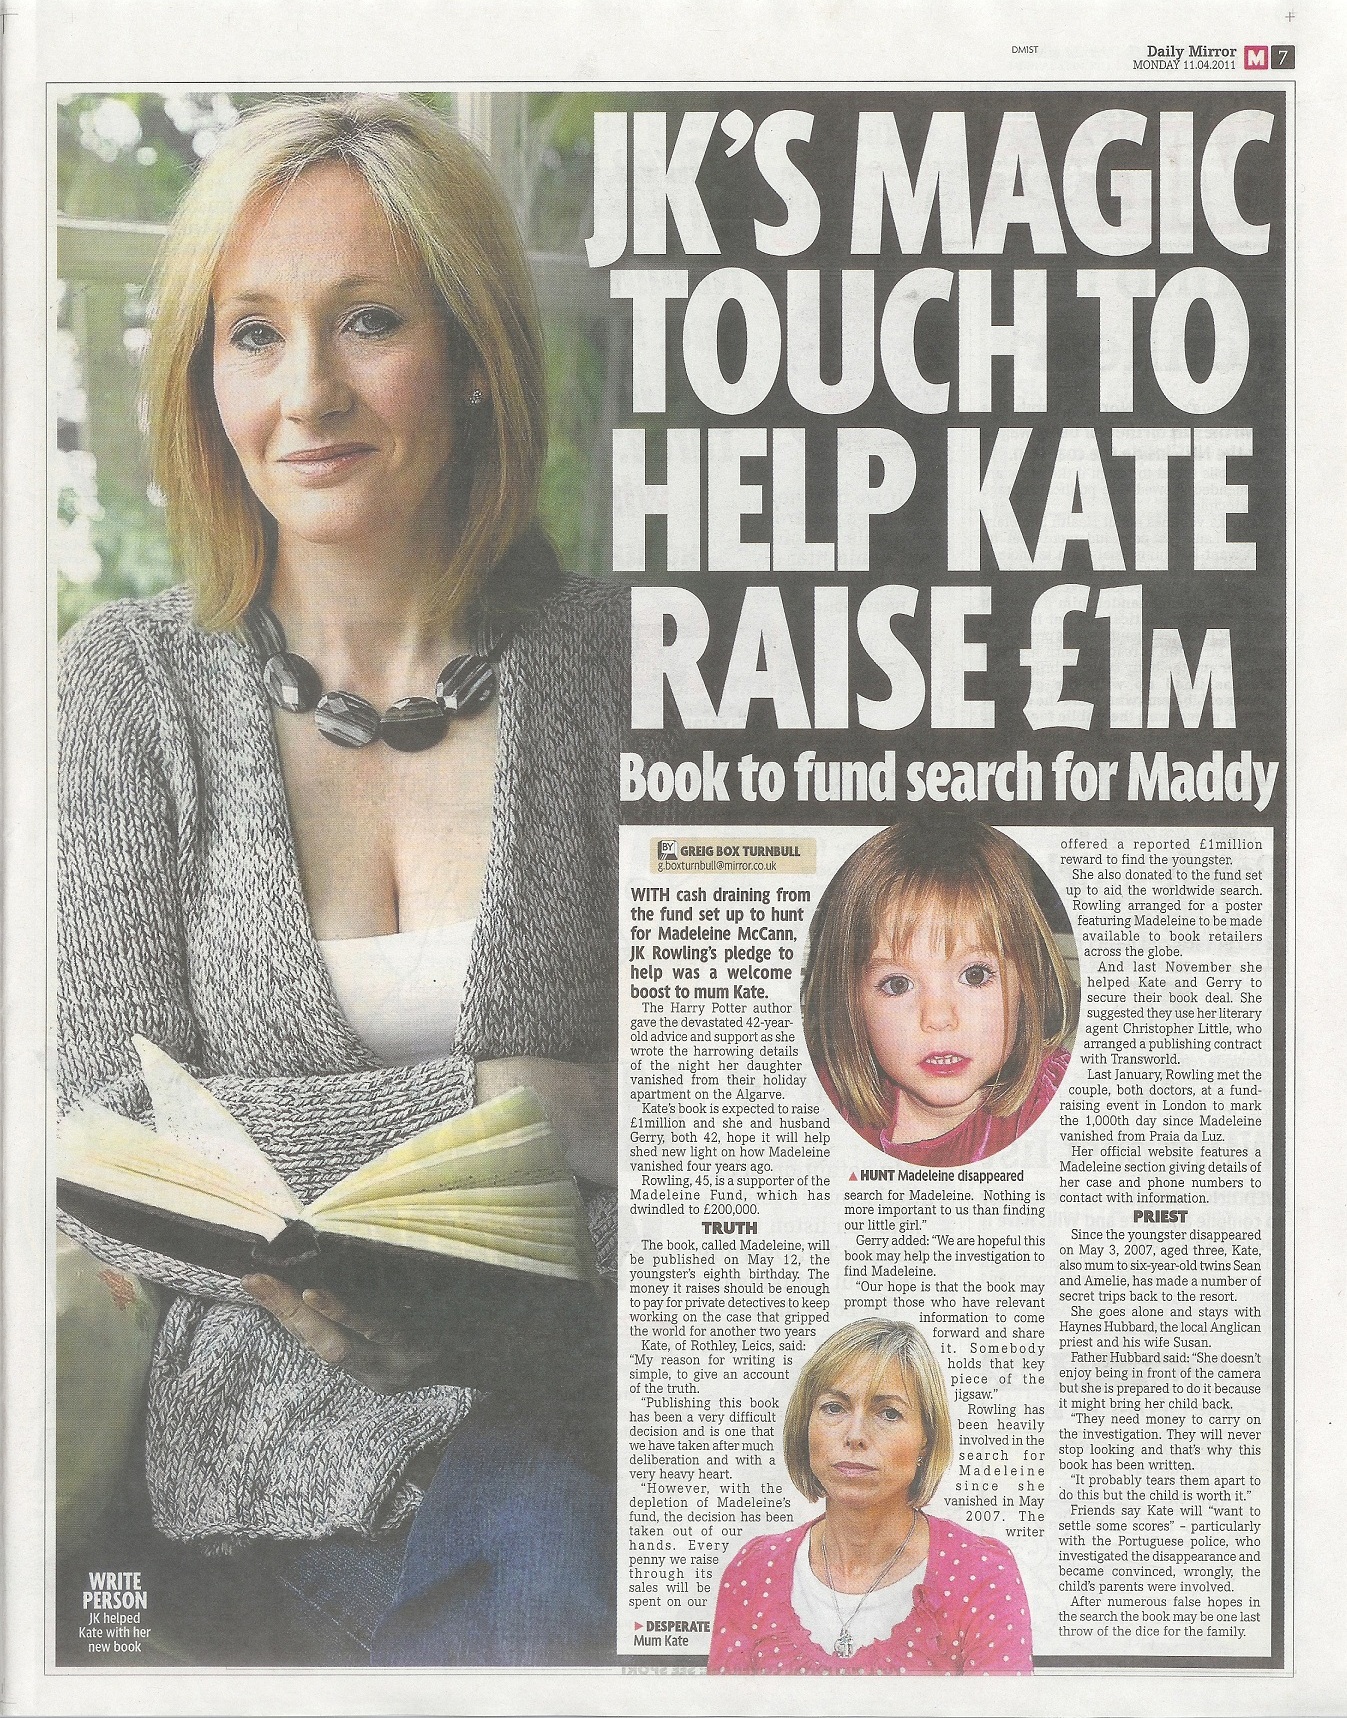 Daily Mirror, paper edition: 'JK's magic touch to help Kate raise £1m', 11 April 2011